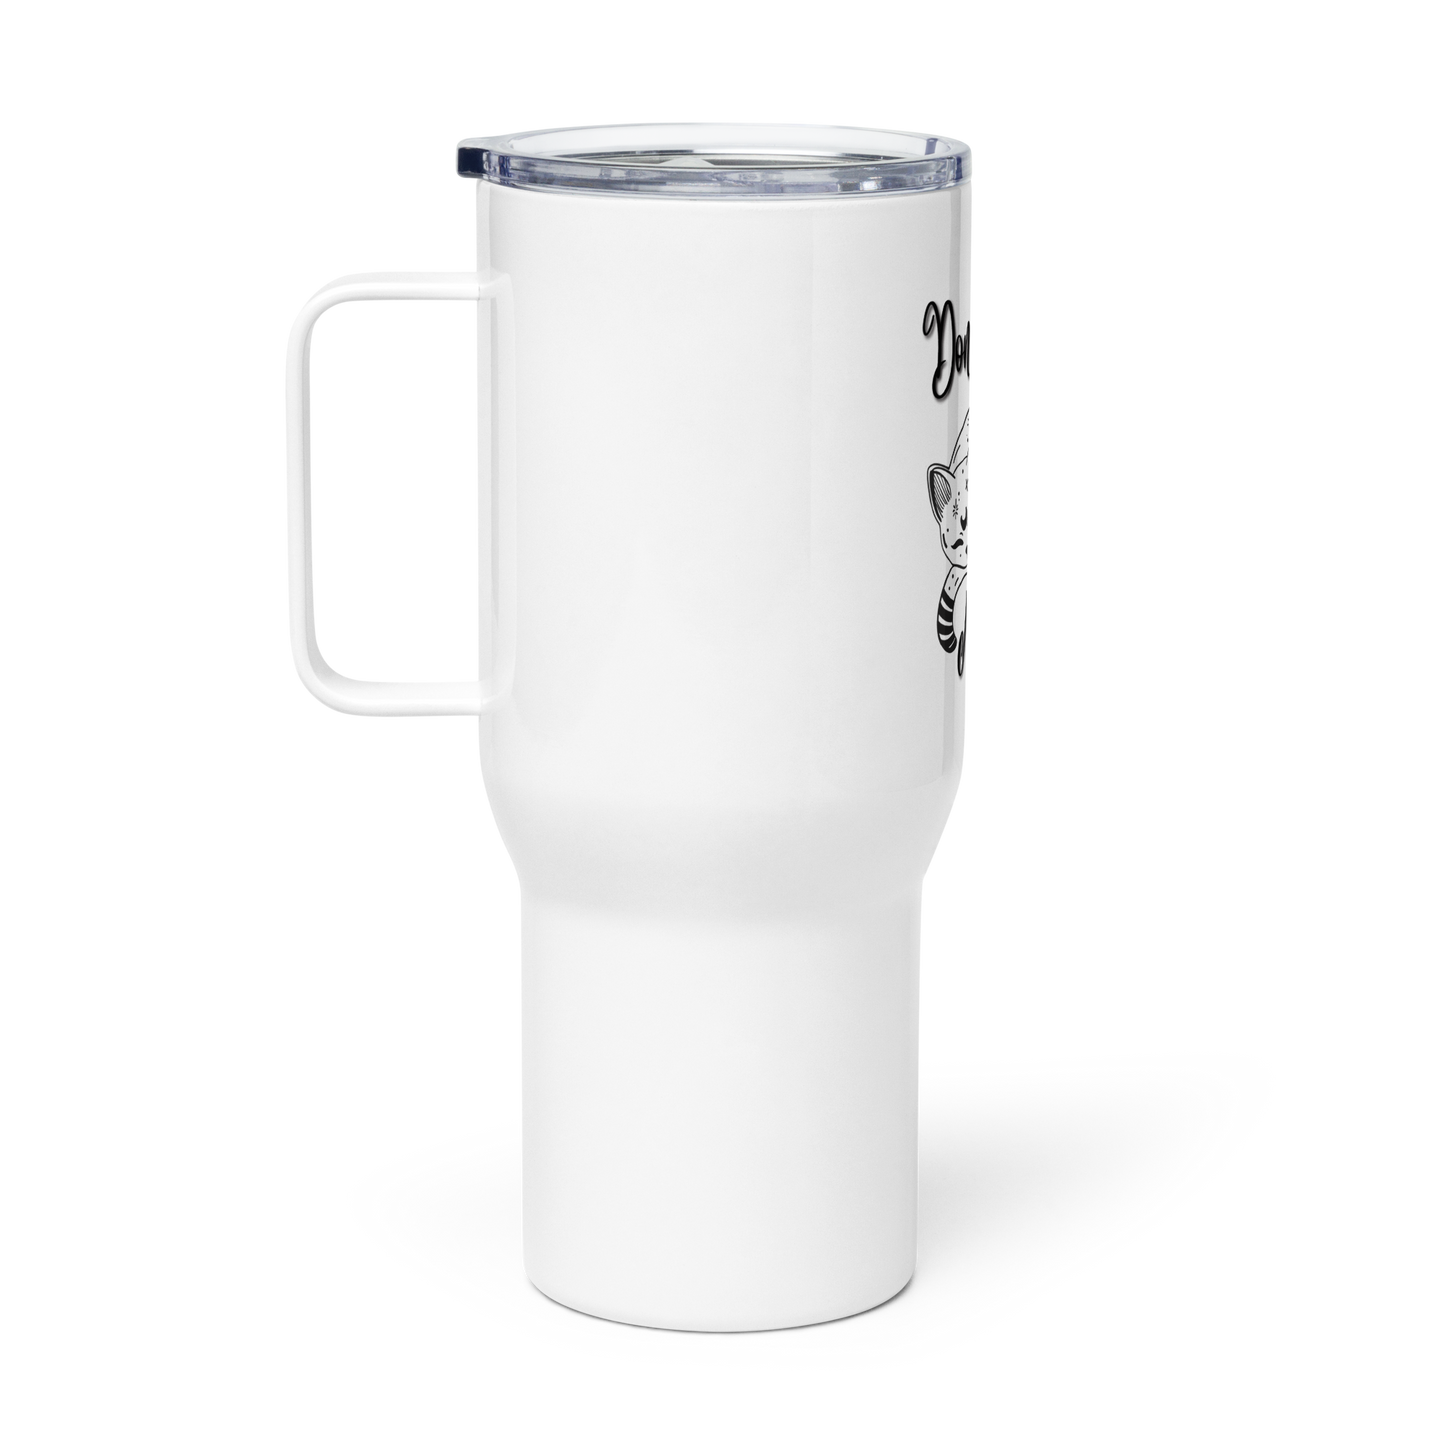 "Don't Stress Me Out" - Travel mug with a handle